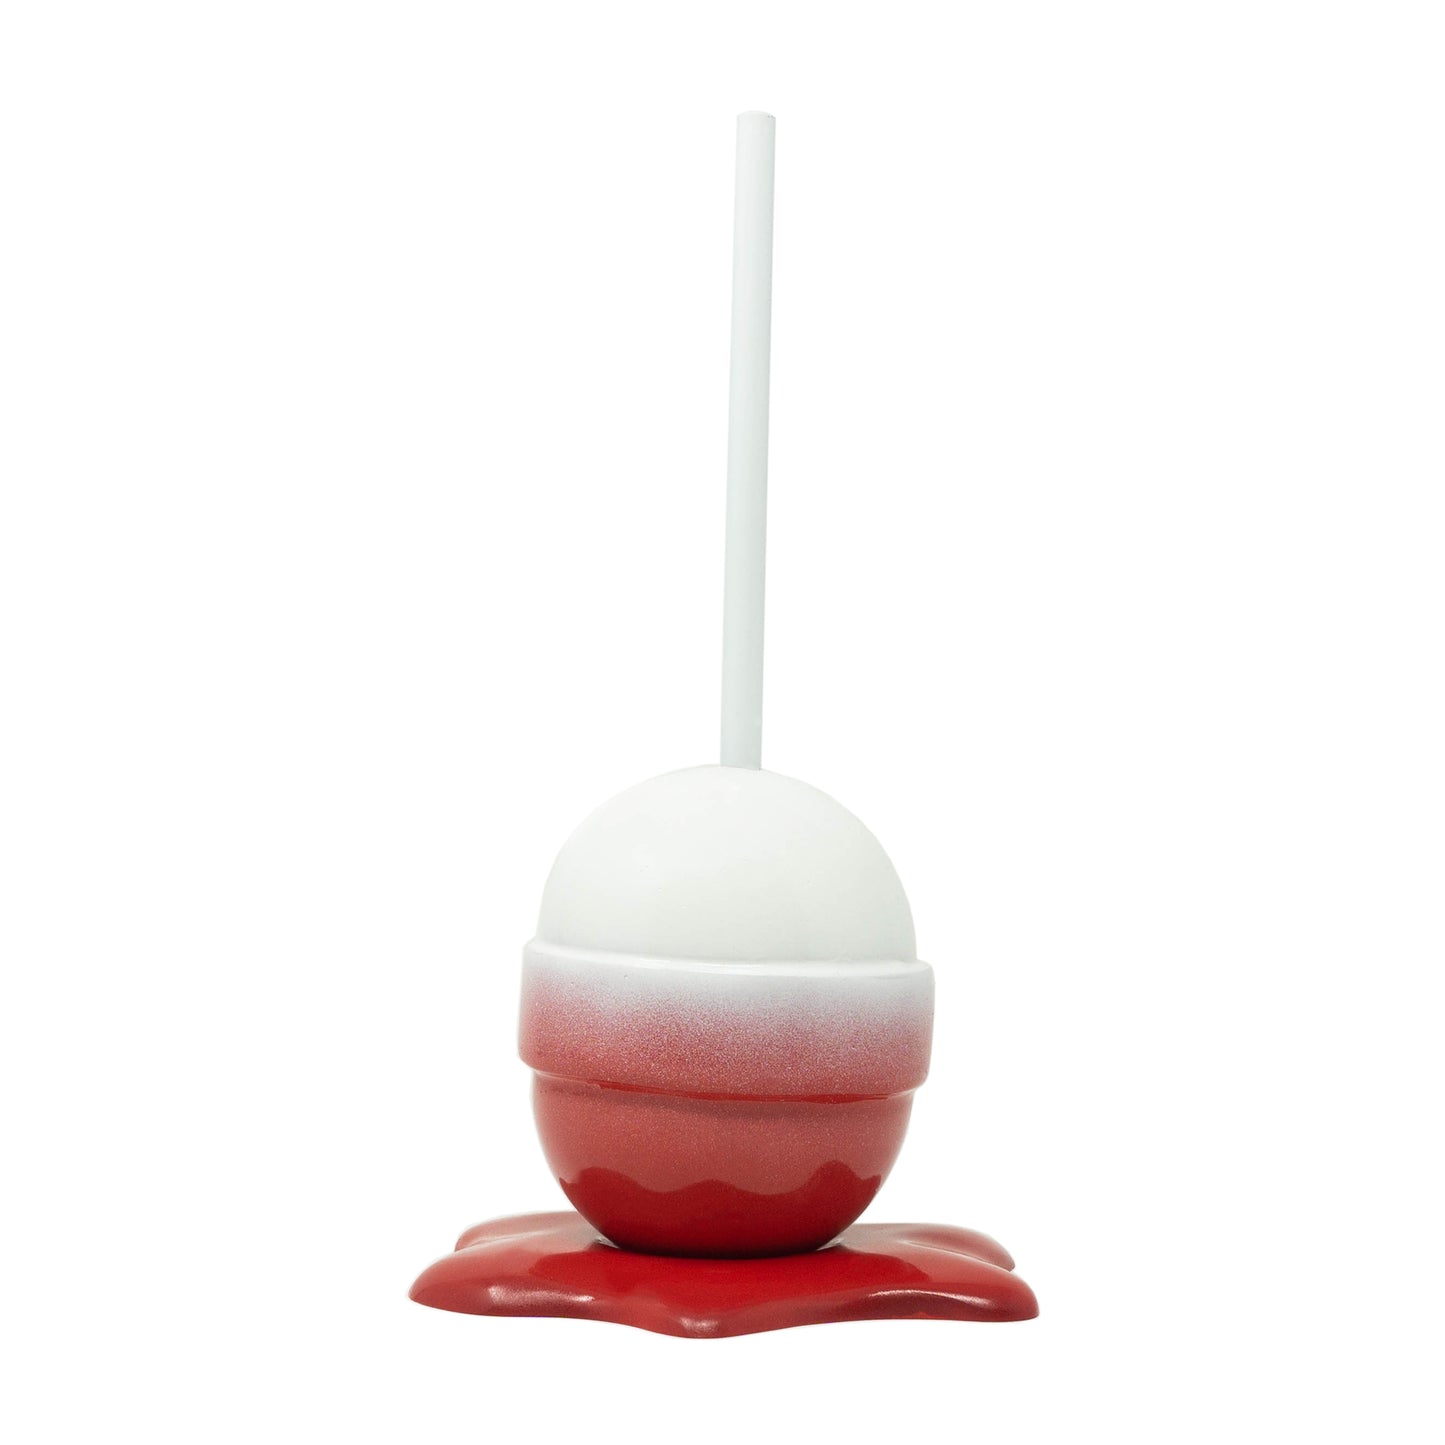 LARGE STRAWBERRIES N CREAM RED OMBRE MELTING BLOW POP RESIN SCULPTURE